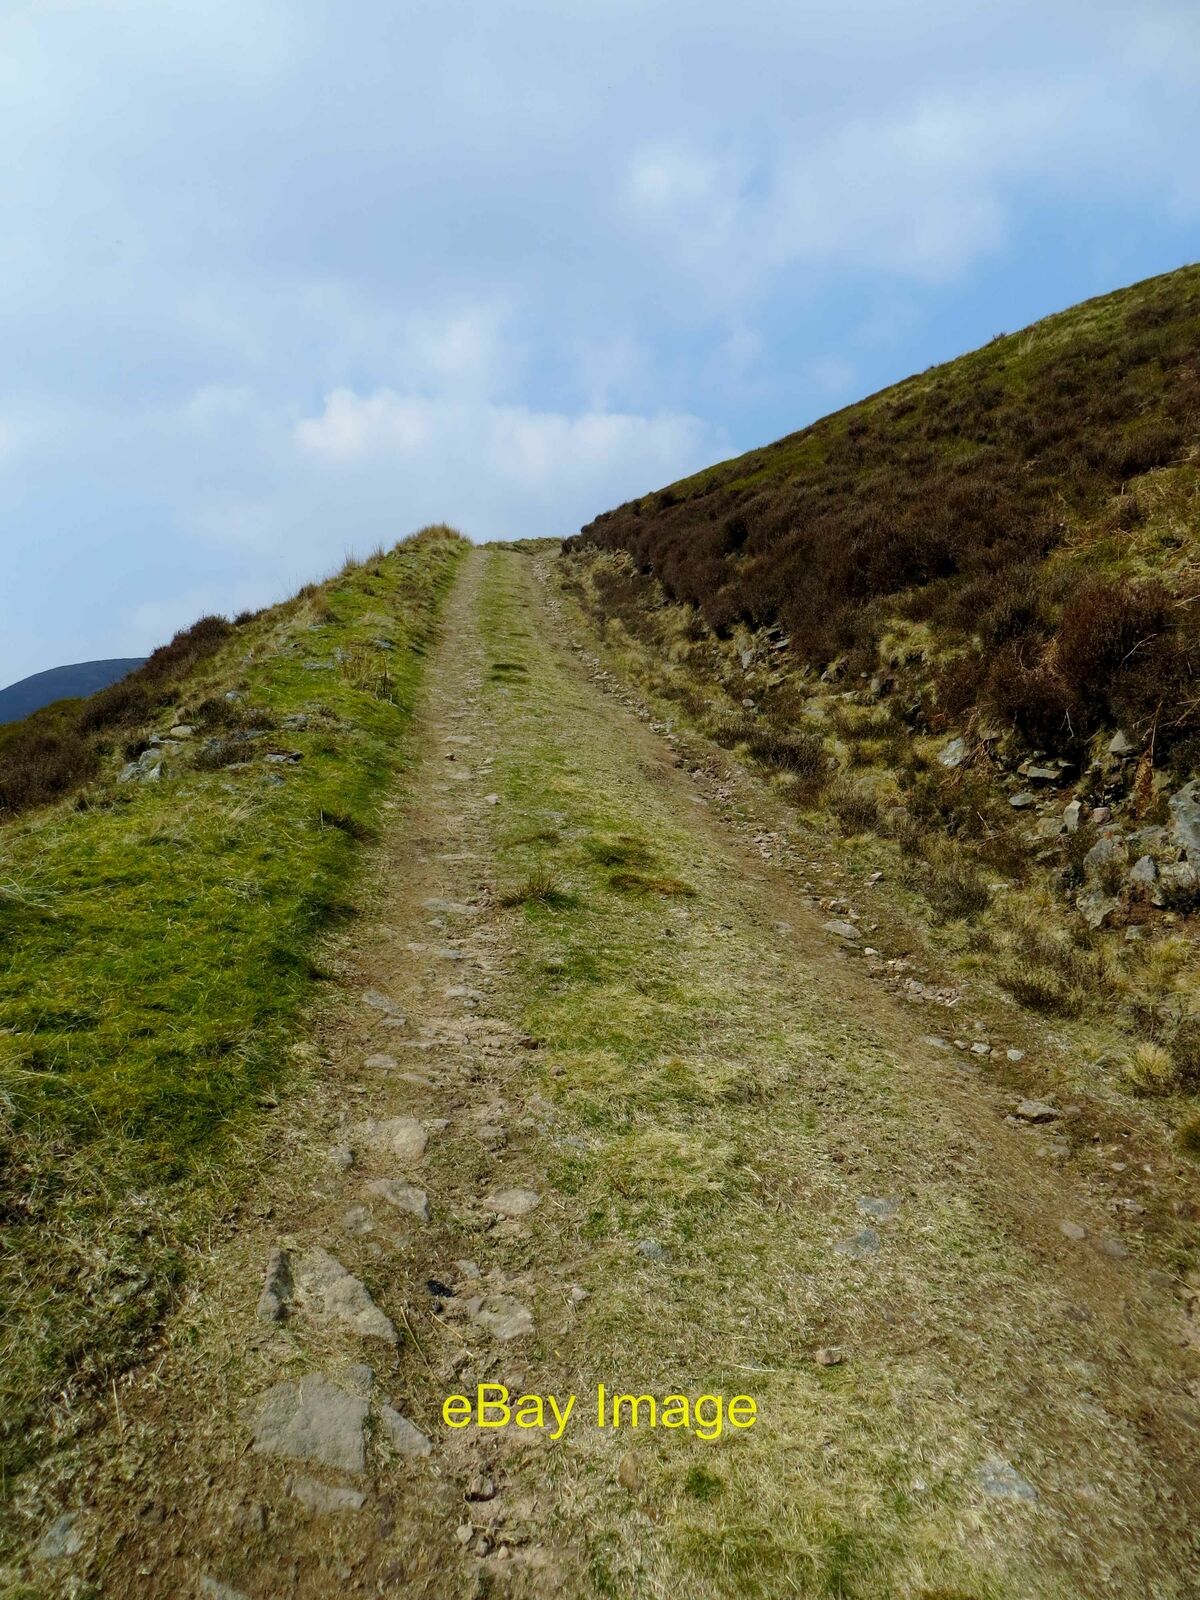 Photo 6x4 Uphill struggle The higher path through the Langden valley test c2015